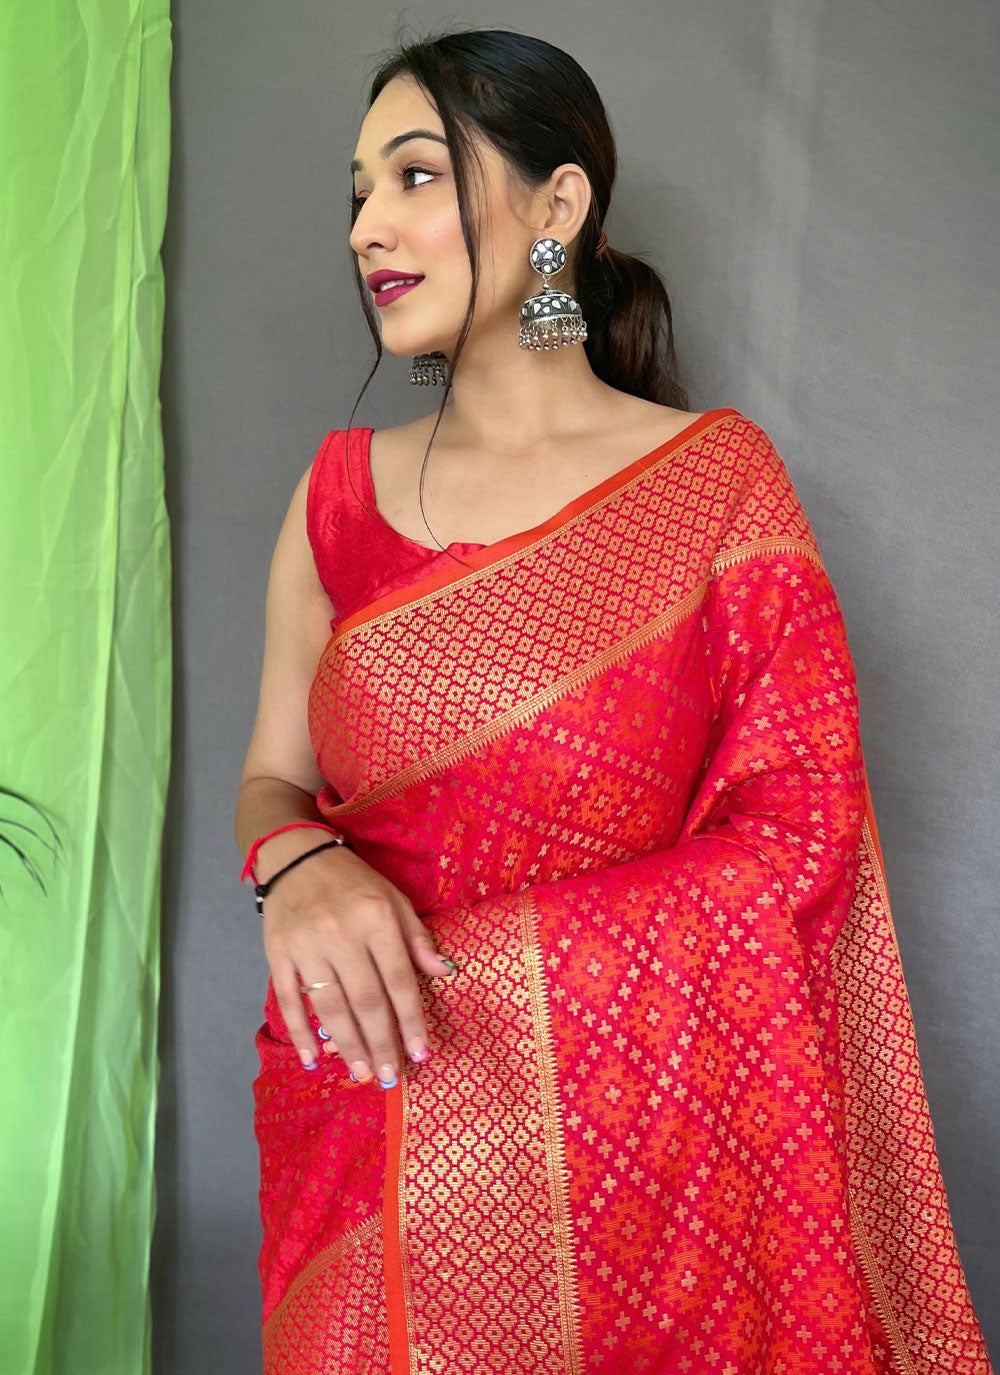 Red Color Trendy Saree